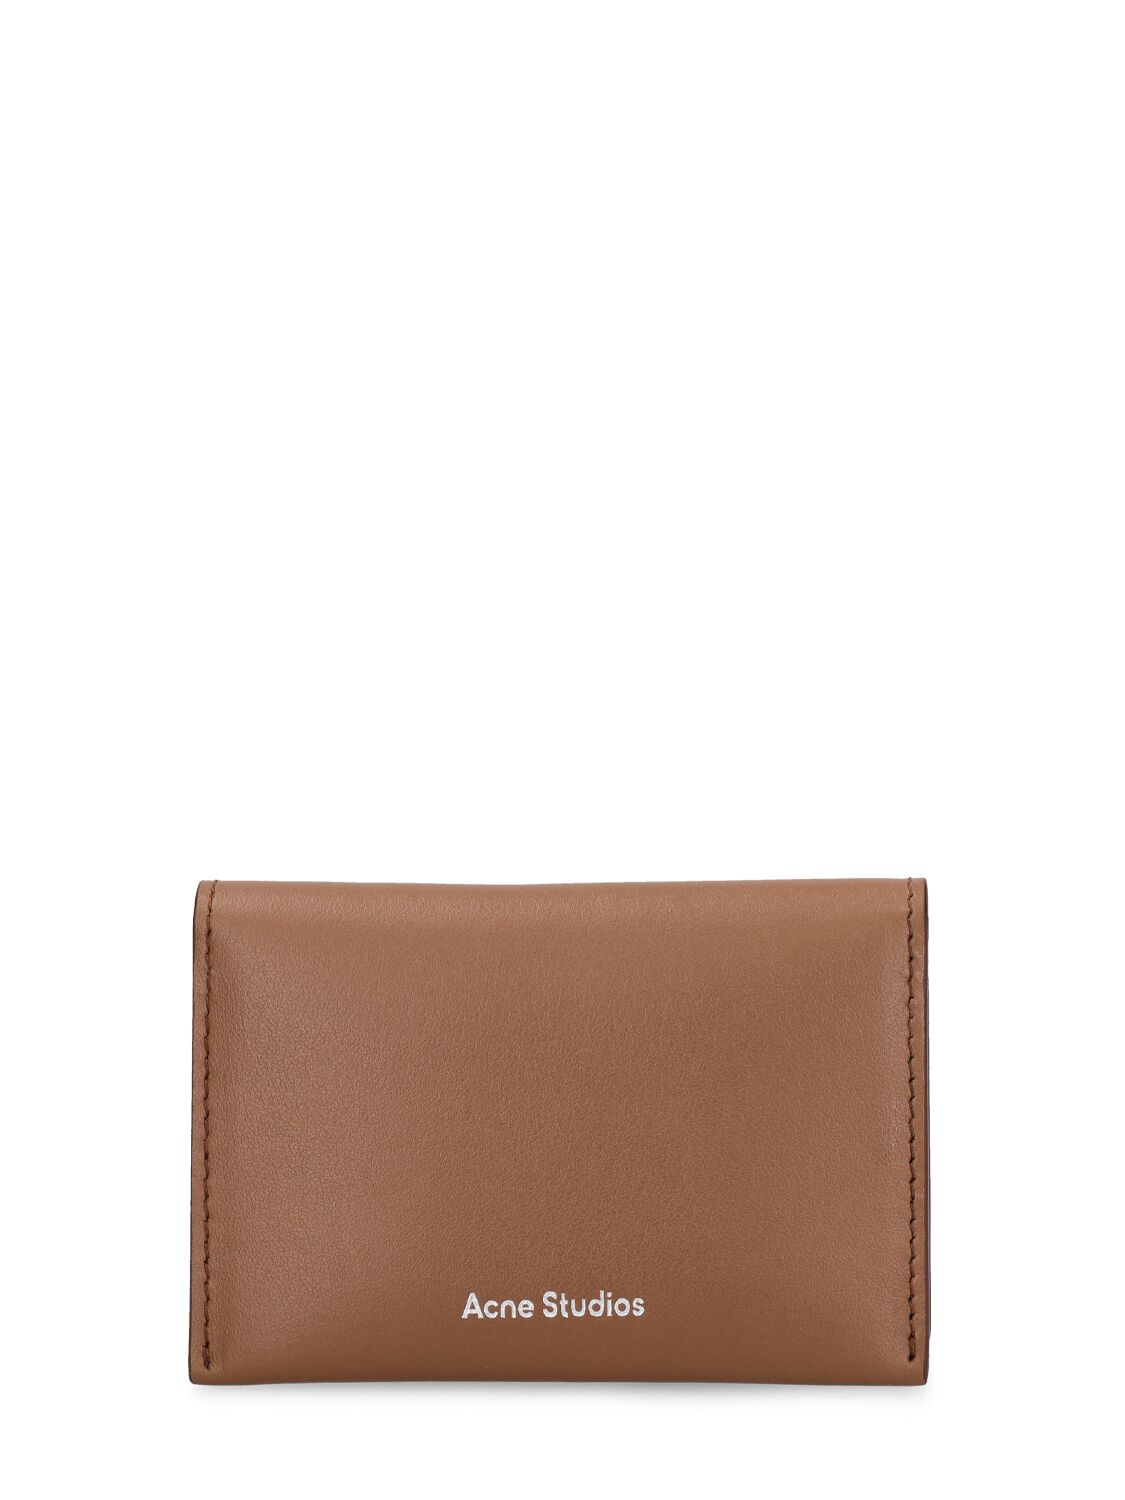 Acne Studios Flap Leather Card Holder In Camel Brown